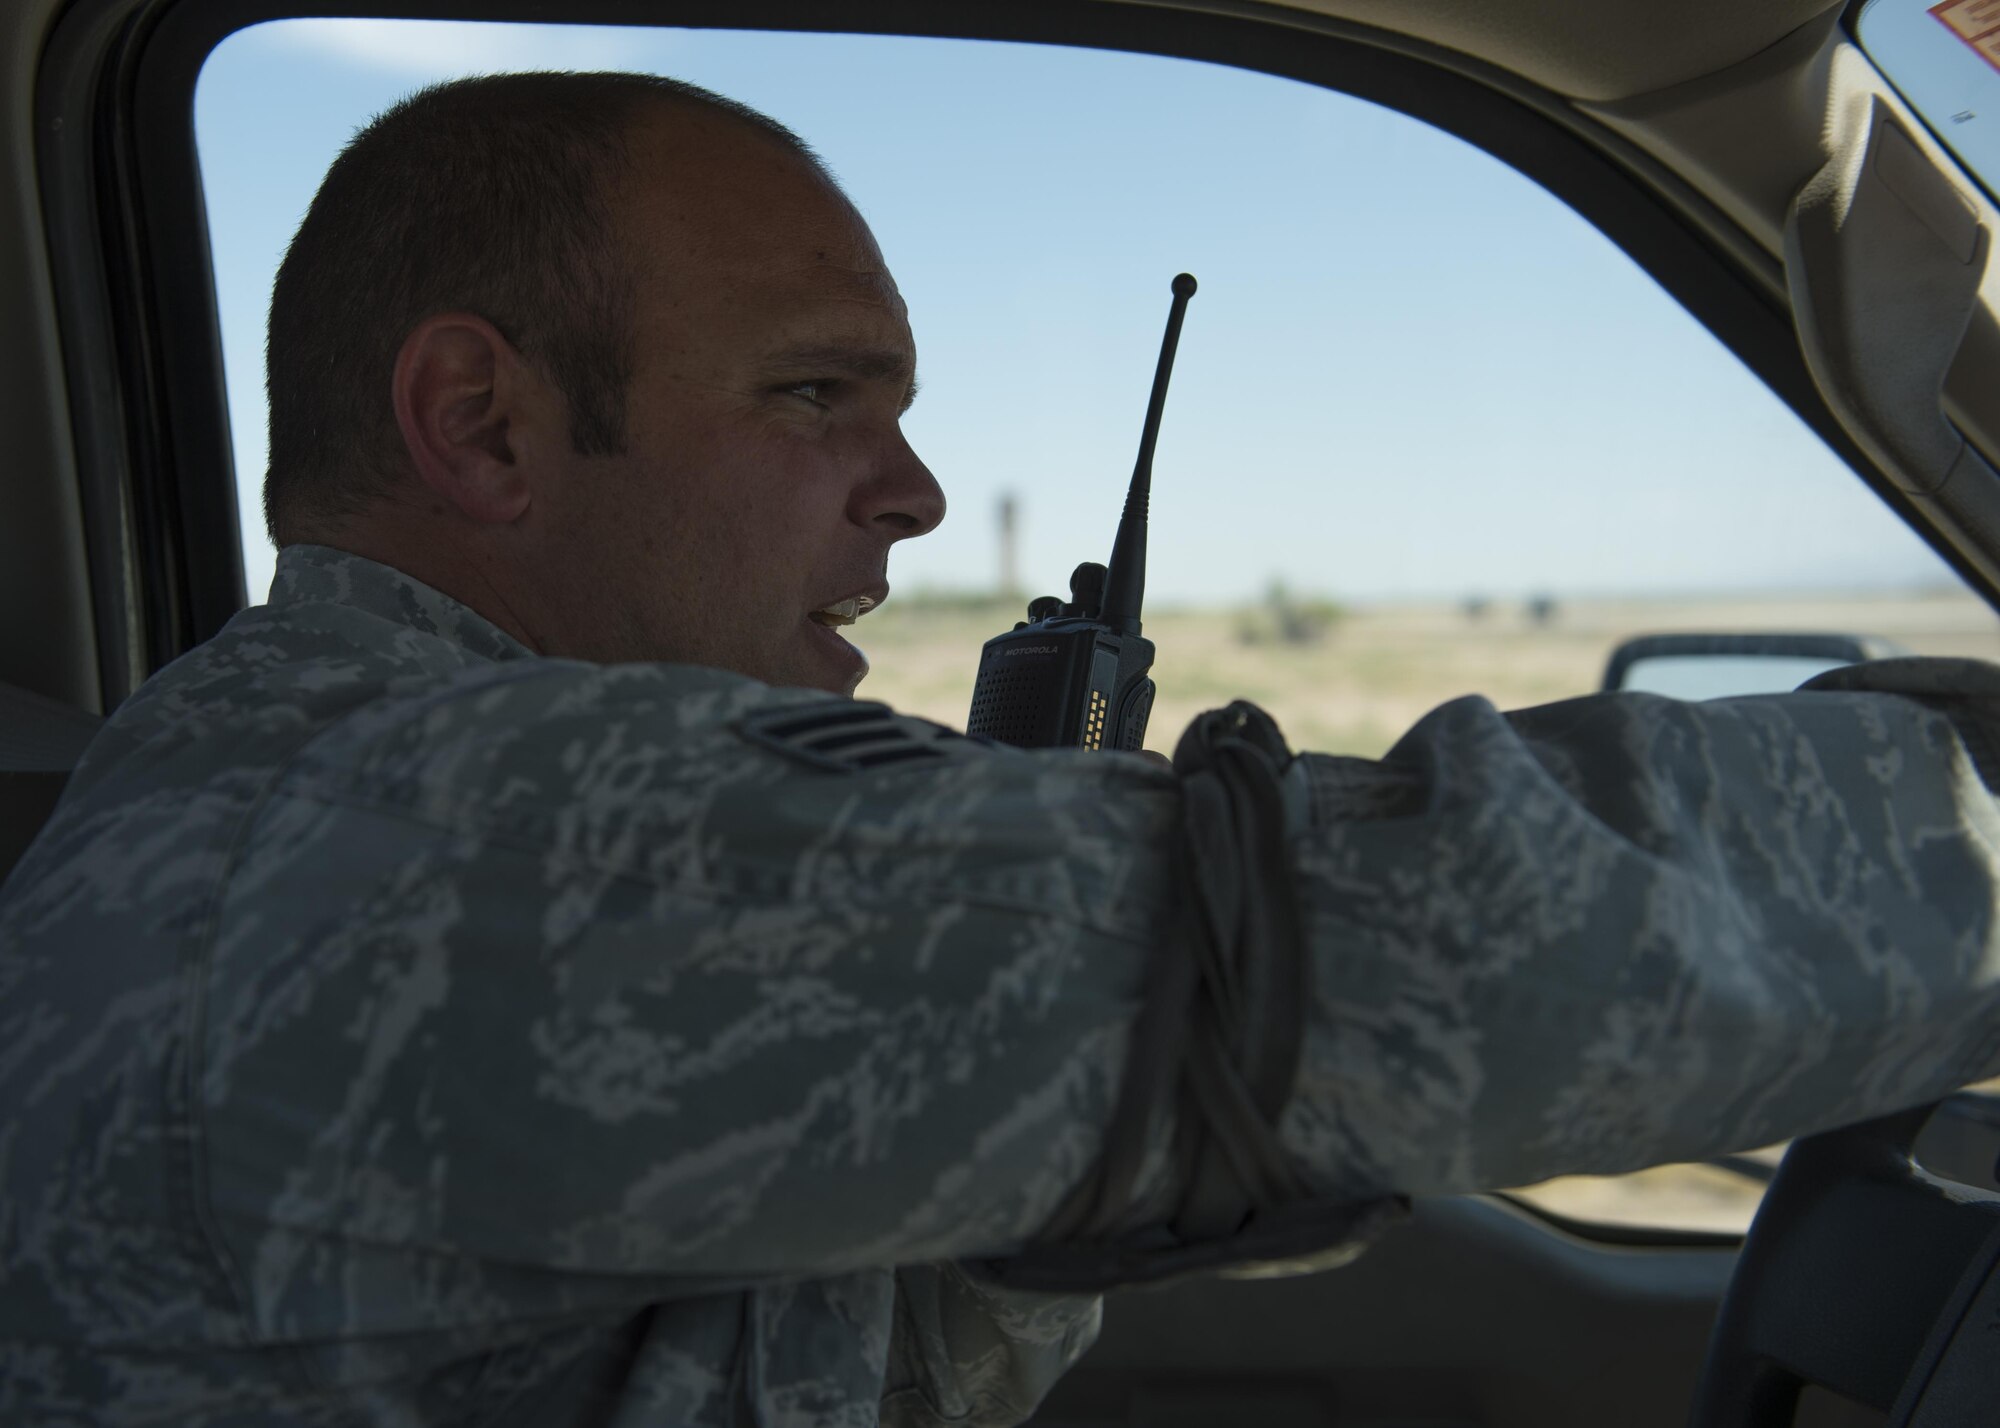 Staff Sgt. Kenneth, a 49th Maintenance Squadron line delivery crew chief, calls Holloman’s air traffic control tower for permission to cross a part of the flight line. Line delivery crew chiefs ensure the safe and timely delivery of munition assets to the flight line in support of the 49th Wing and tenant unit flying missions. (Last names are withheld due to operational requirements. U.S. Air Force photo by Senior Airman BreeAnn Sachs)